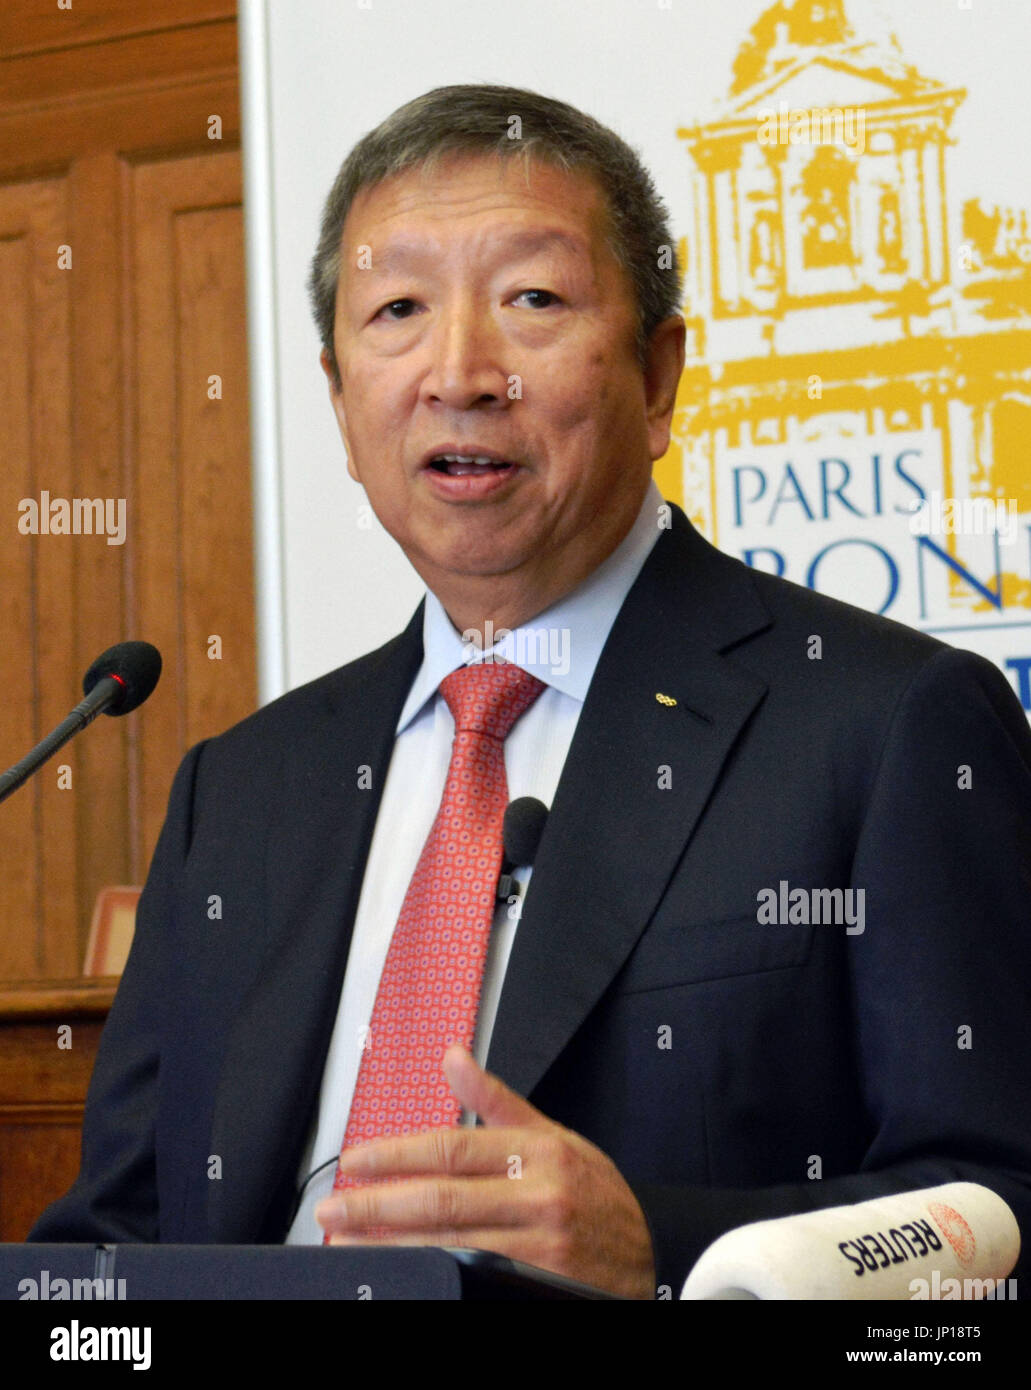 PARIS, France - International Olympic Committee Vice President Ser Miang Ng of Singapore announces his candidacy for an upcoming IOC presidential election during a press conference in Paris, France, on May 16, 2013. (Kyodo) Stock Photo